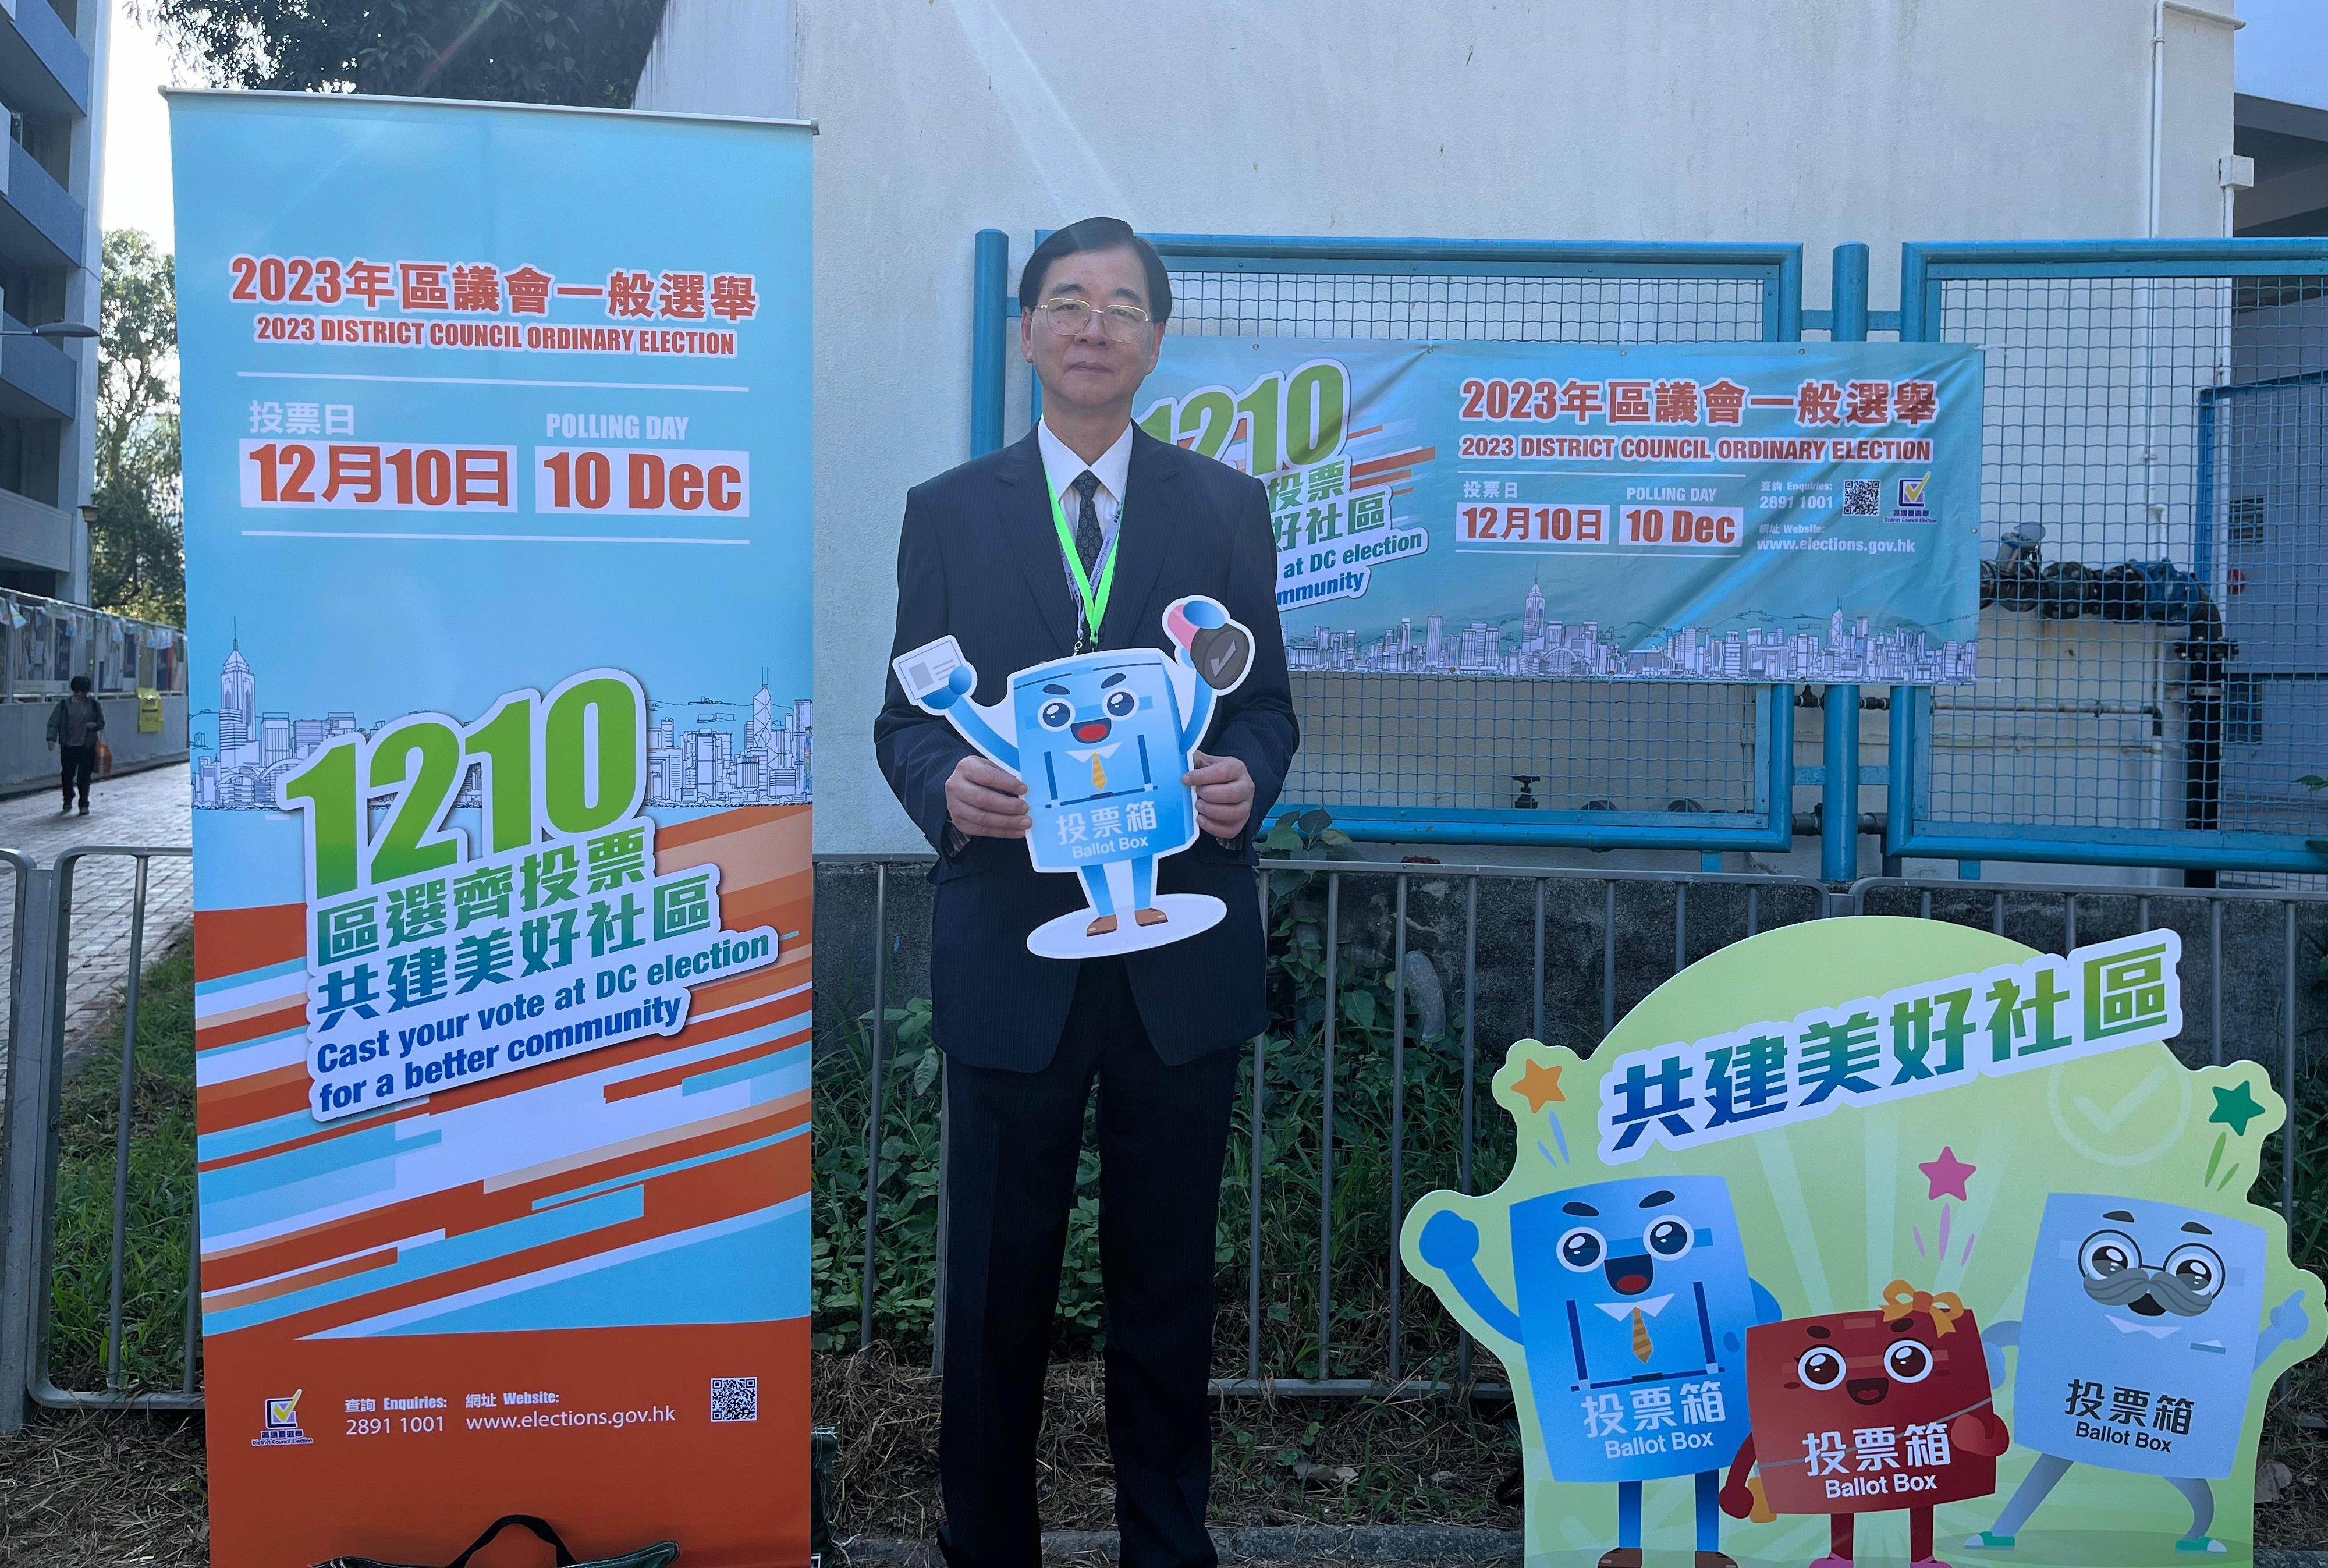 The Electoral Affairs Commission member Professor Daniel Shek is pictured with the "check-in" spot set up next to the polling station after casting a vote in the 2023 District Council Ordinary Election this morning (December 10).
